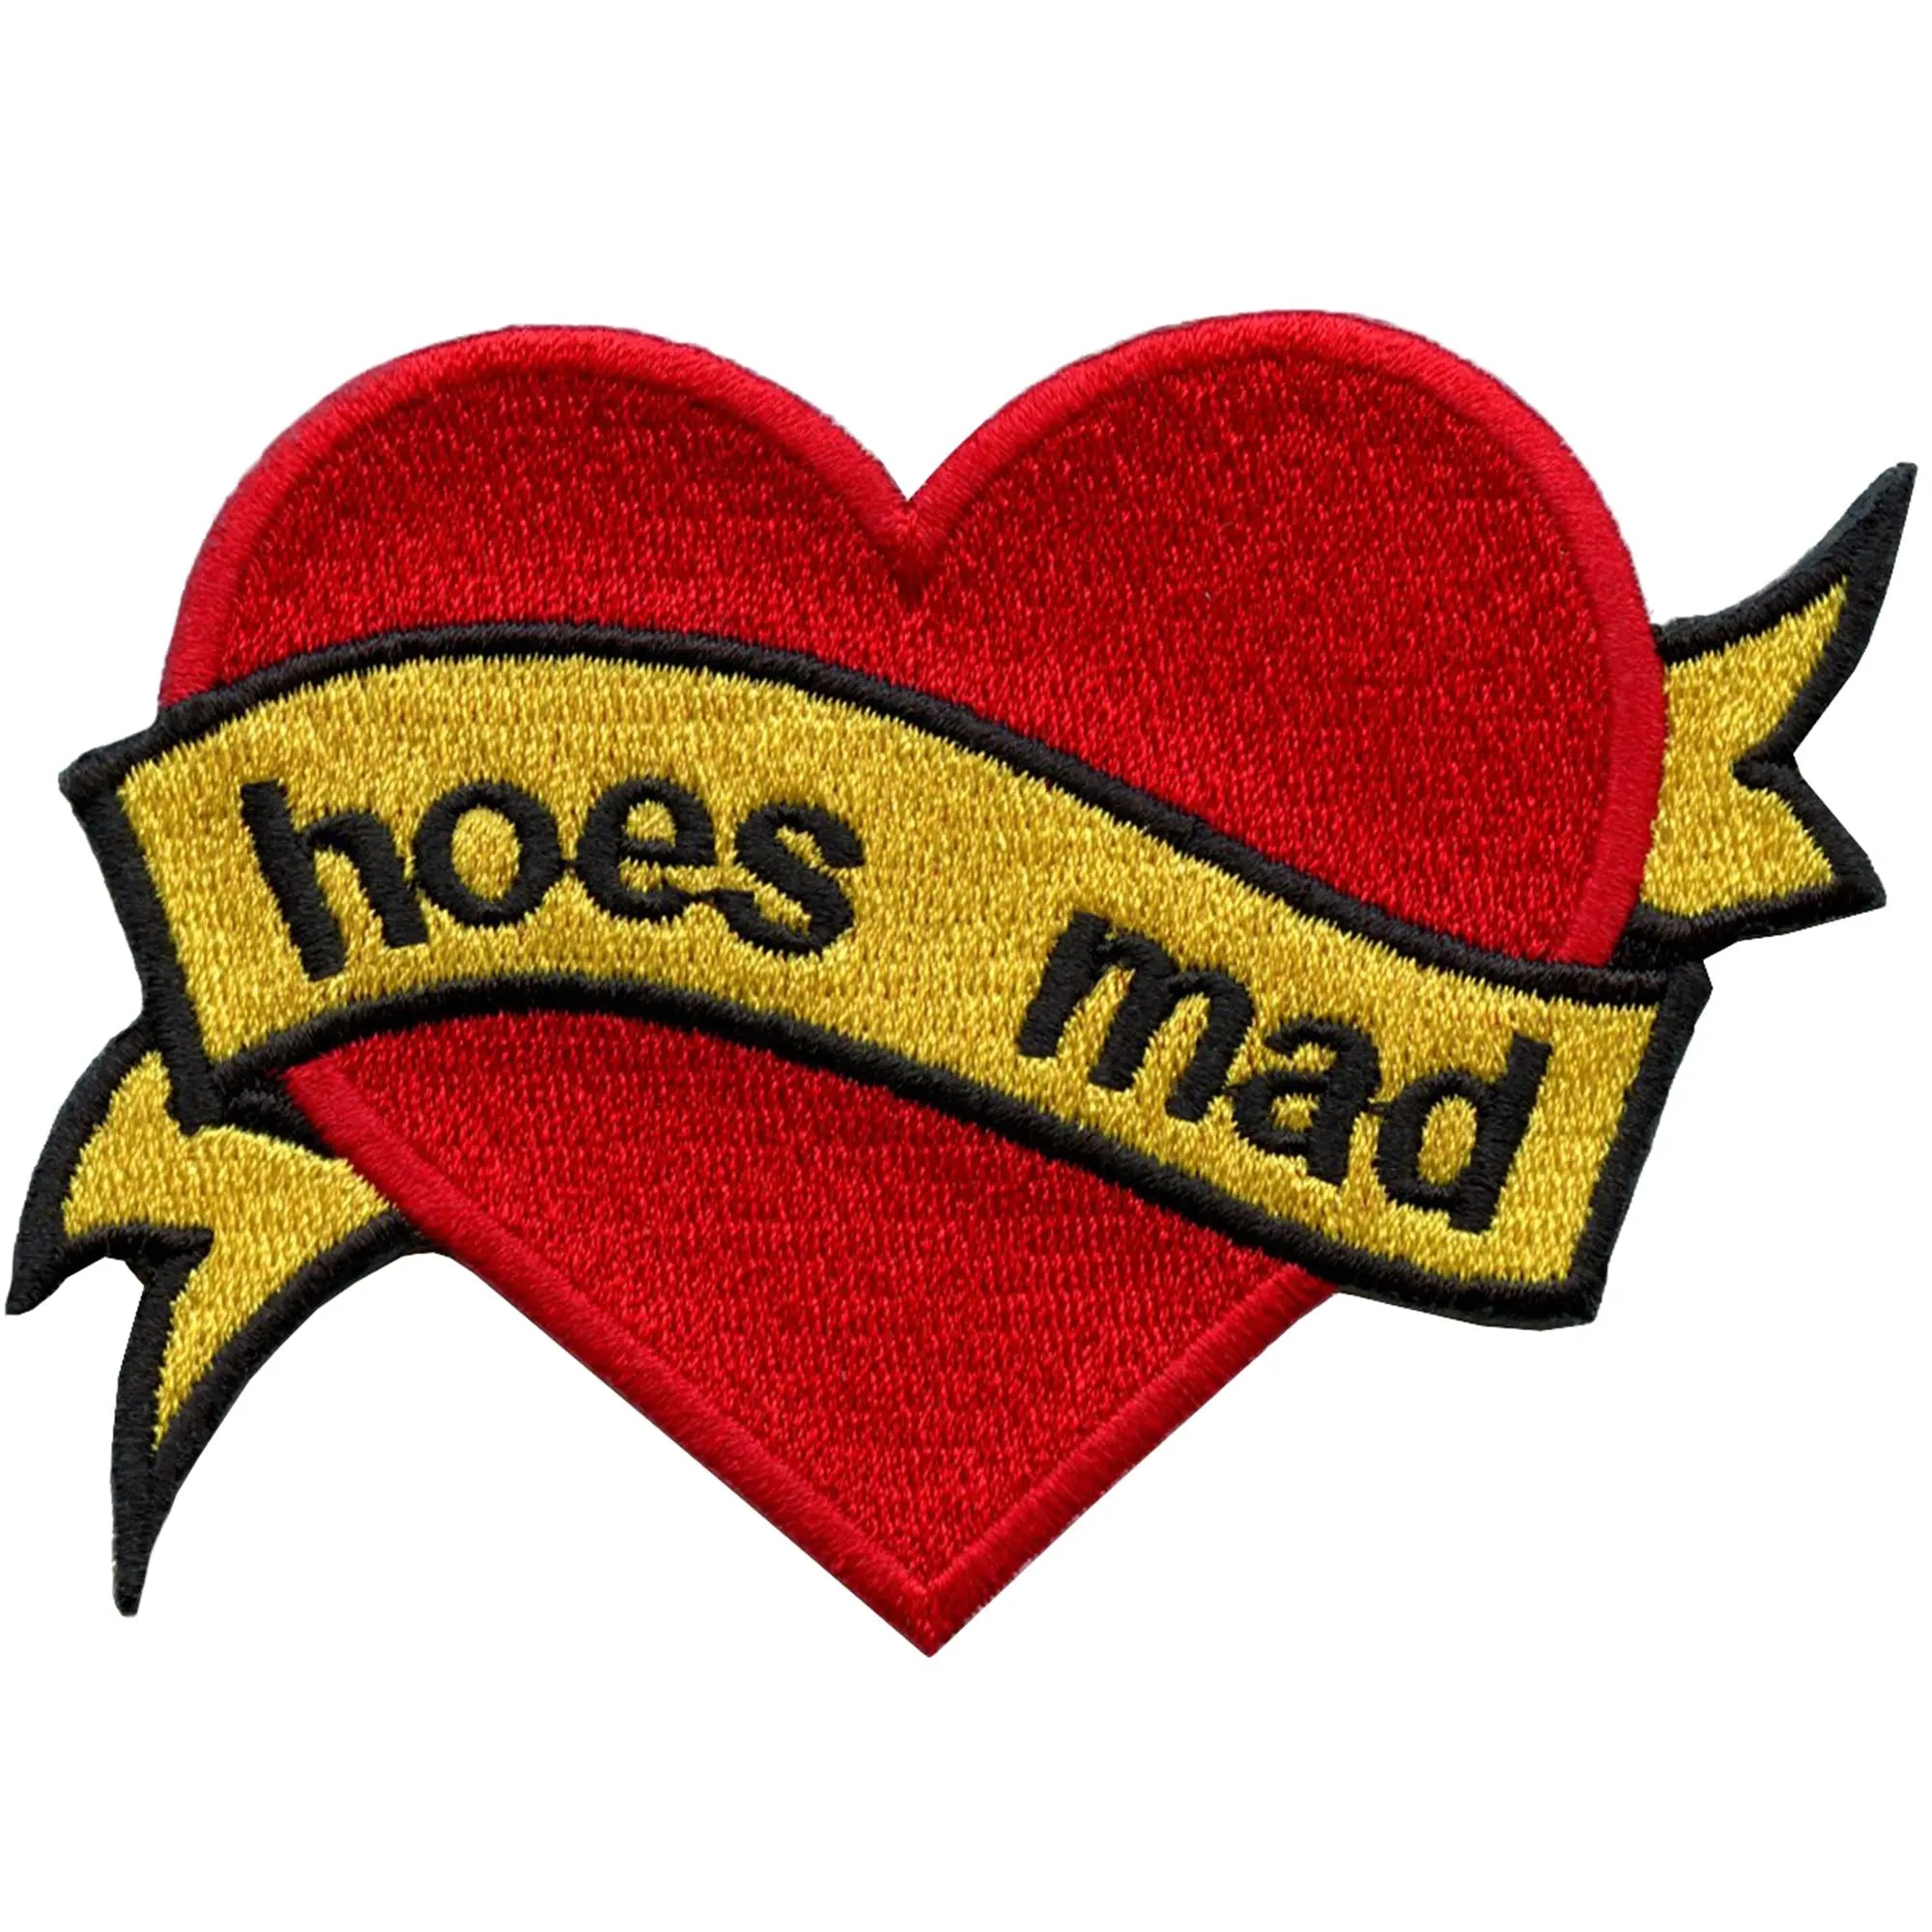 Hoes Mad Heart Patch Valentine Meme Banner Embroidered Iron On – Patch  Collection